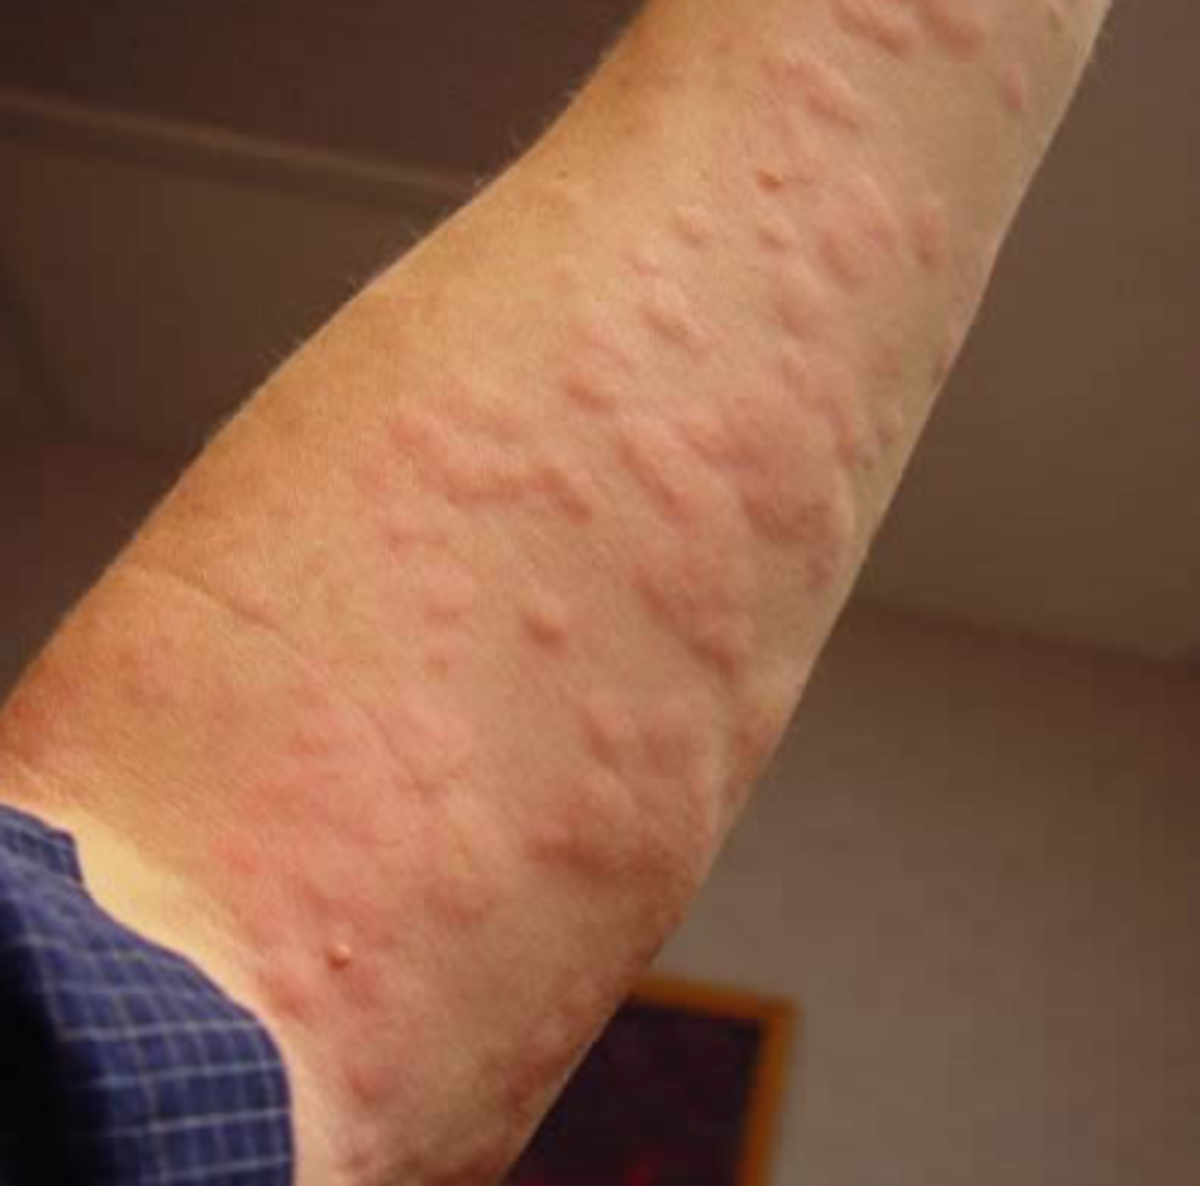 Relief From Hives (Urticaria) and Eczema Rashes In Under One Minute